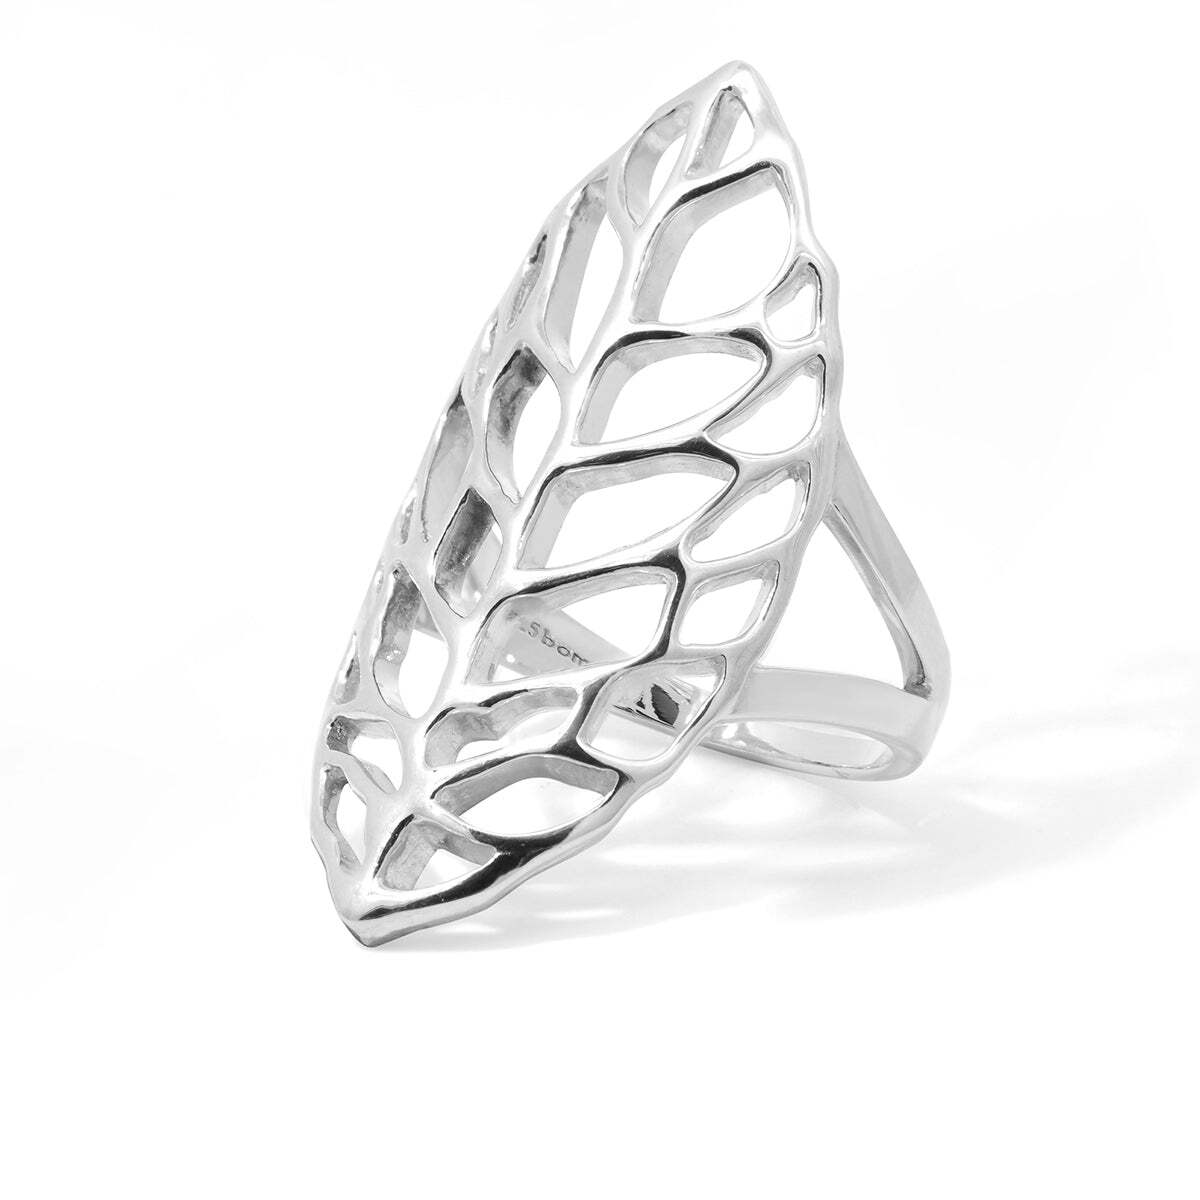 Boma Jewelry Rings 6 Leaf Bold Ring